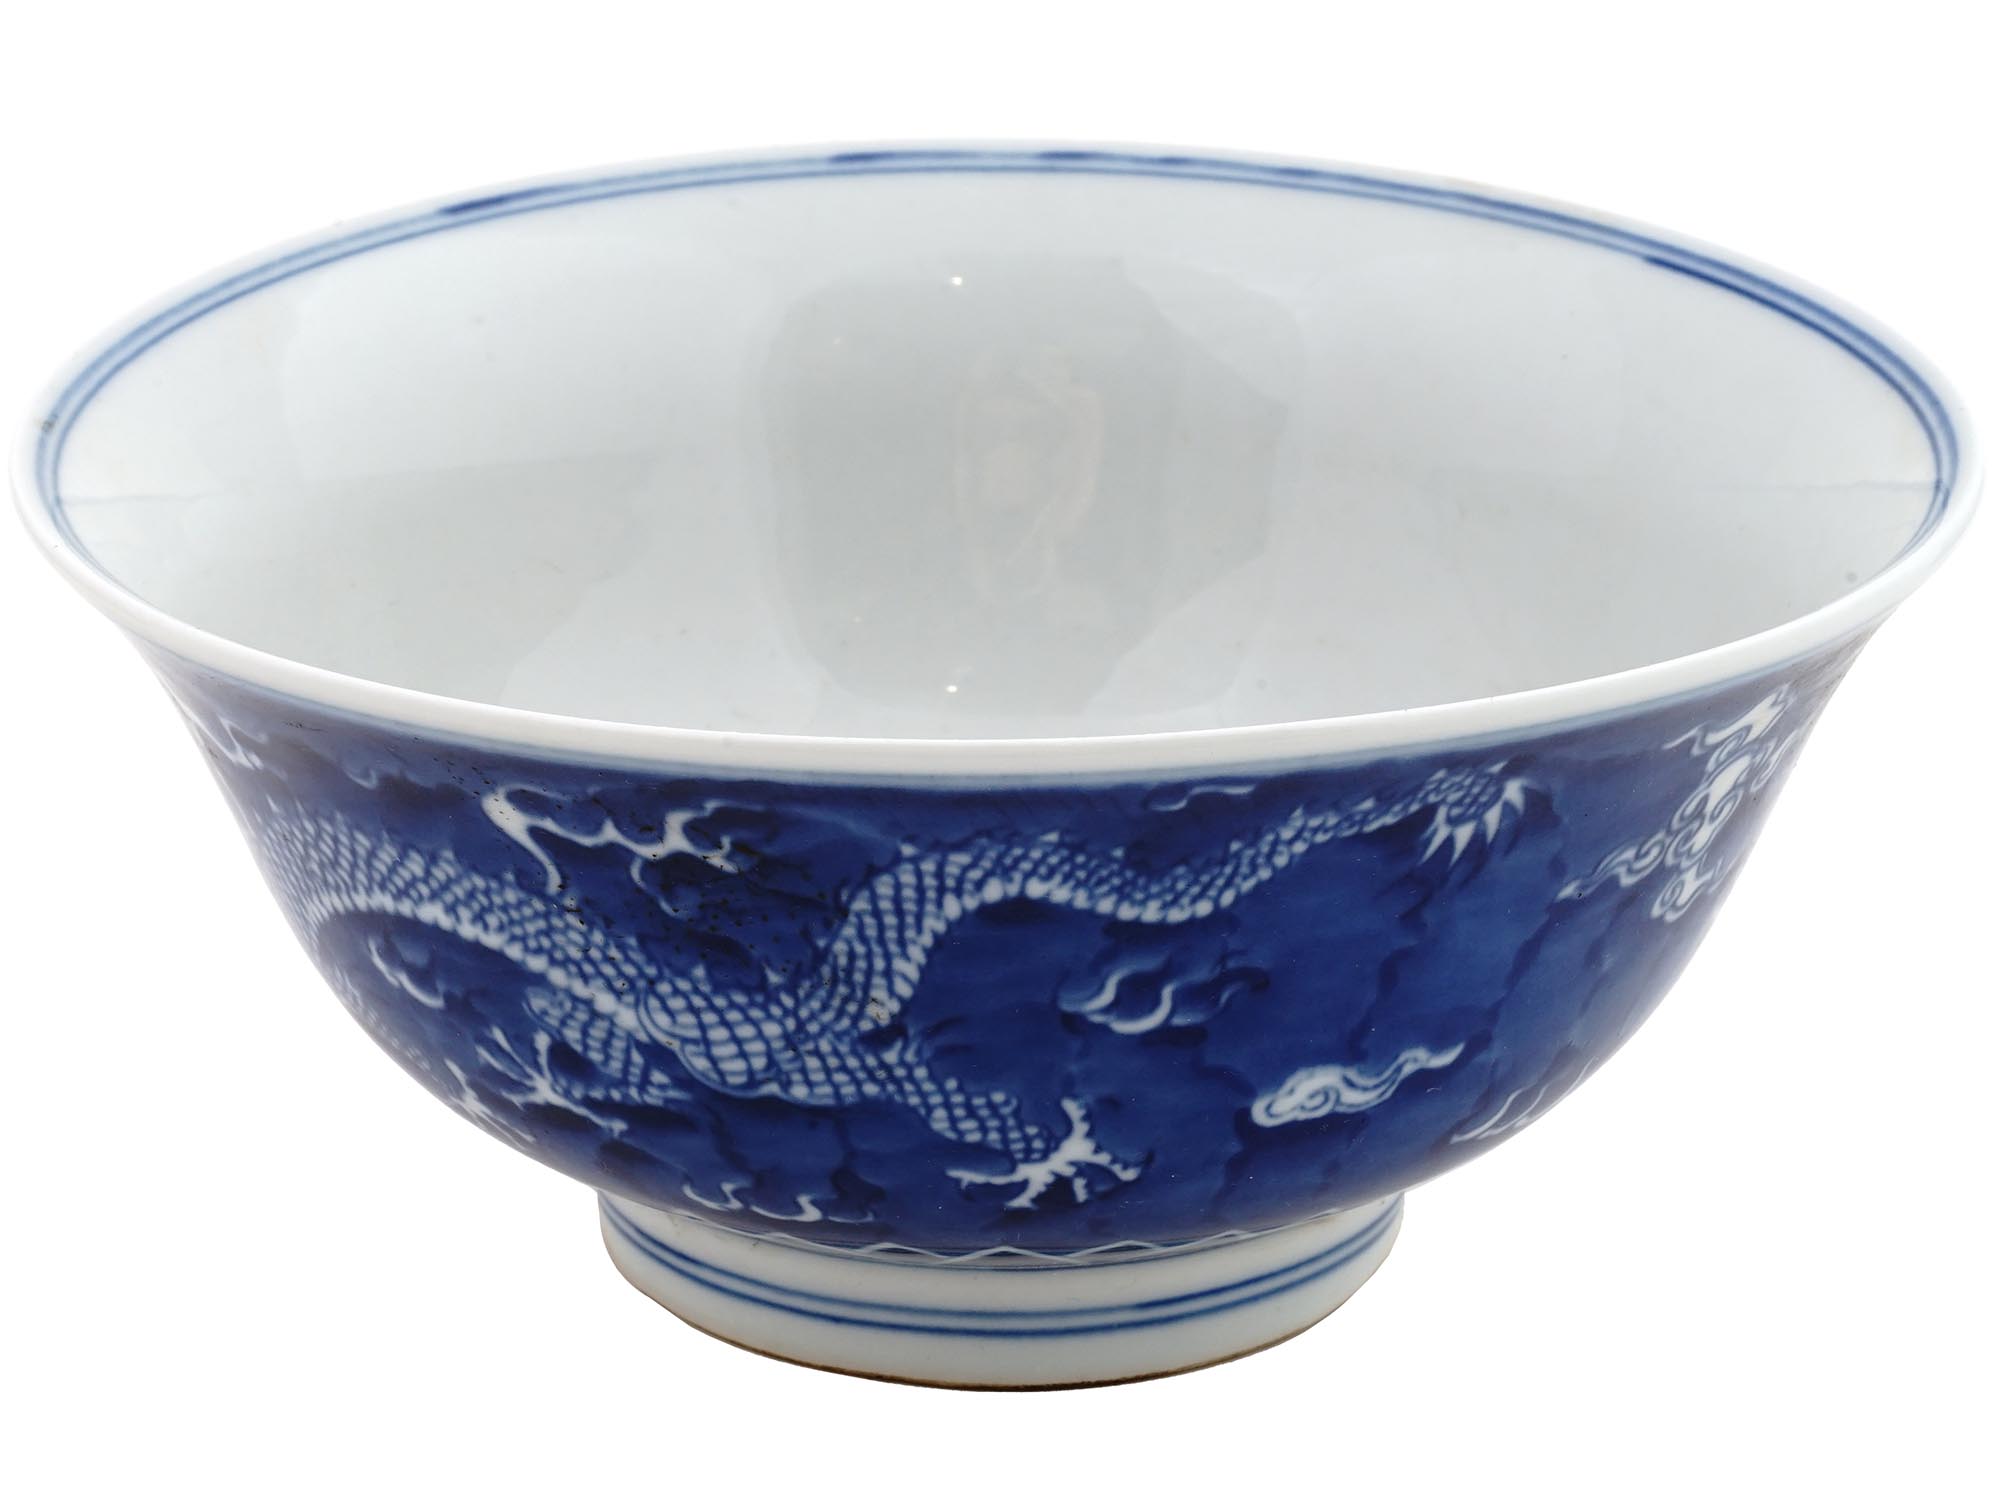 ANTIQUE CHINESE QING BLUE AND WHITE PORCELAIN BOWL PIC-0